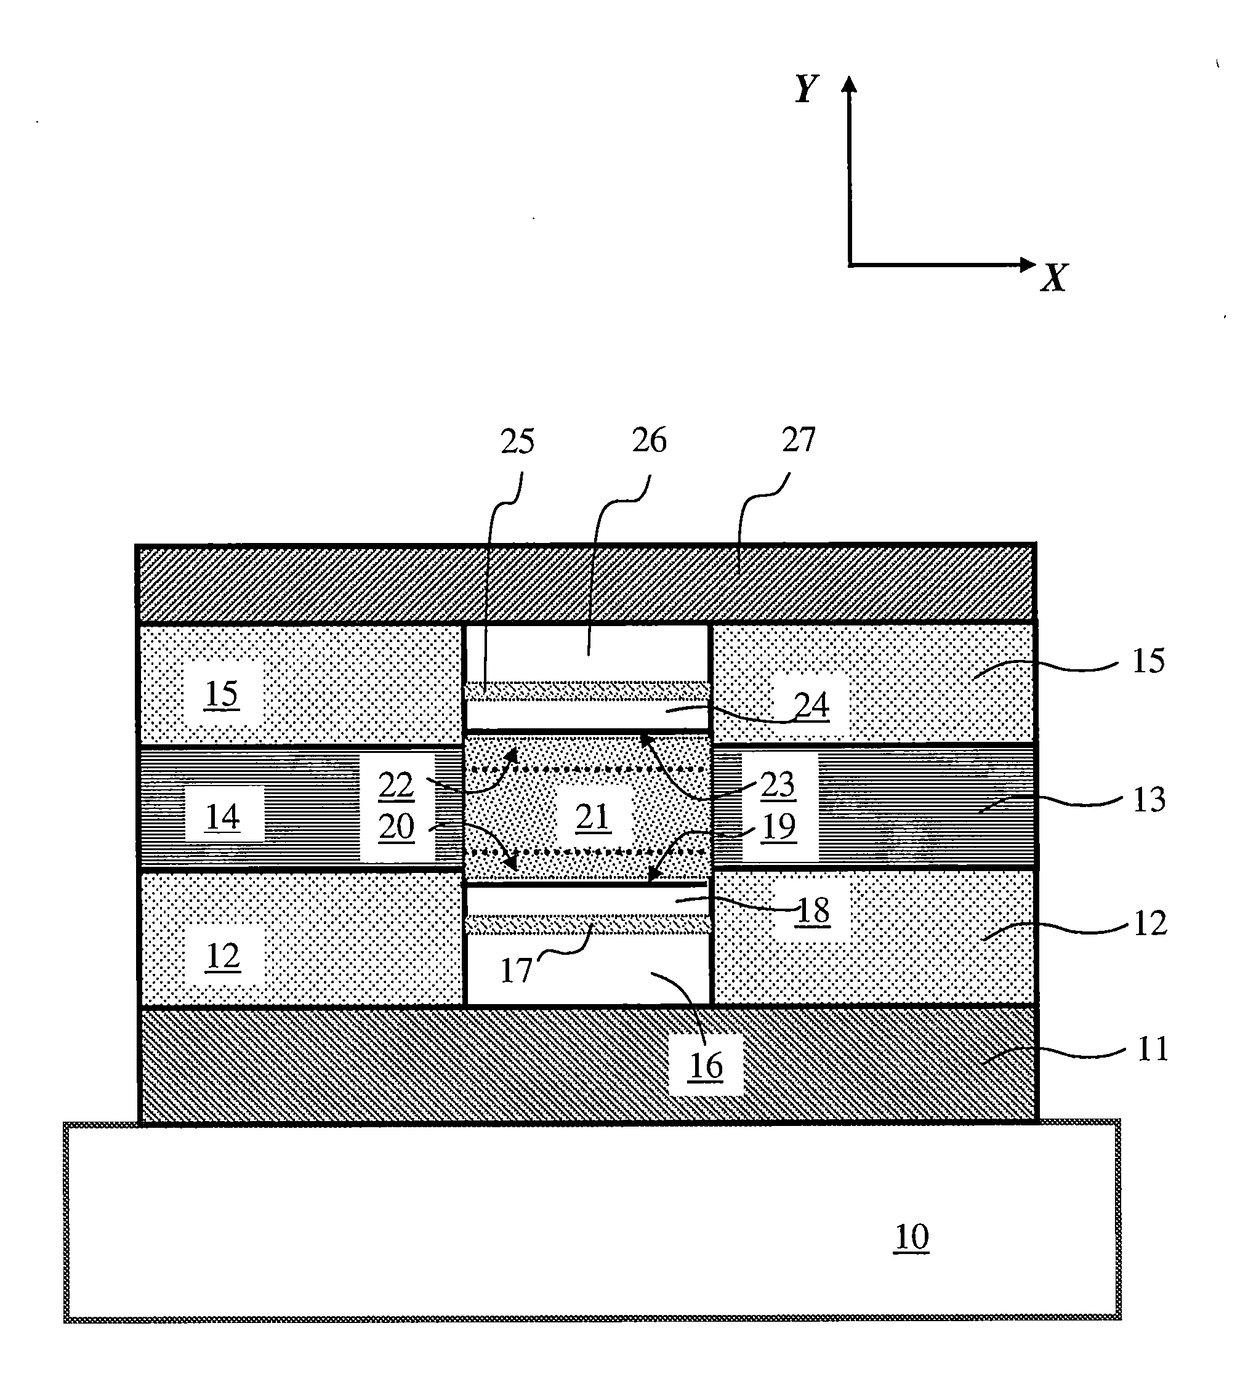 SEMICONDUCTOR MEMORY DEVICES FOR USE IN ELECTRICALLY ALTERABLE READ ONLY MEMORY (ROM) AND SEMICONDUCTOR THIN FILM DEVICES (SPINTRONS and SPIN-ORBITRONS)